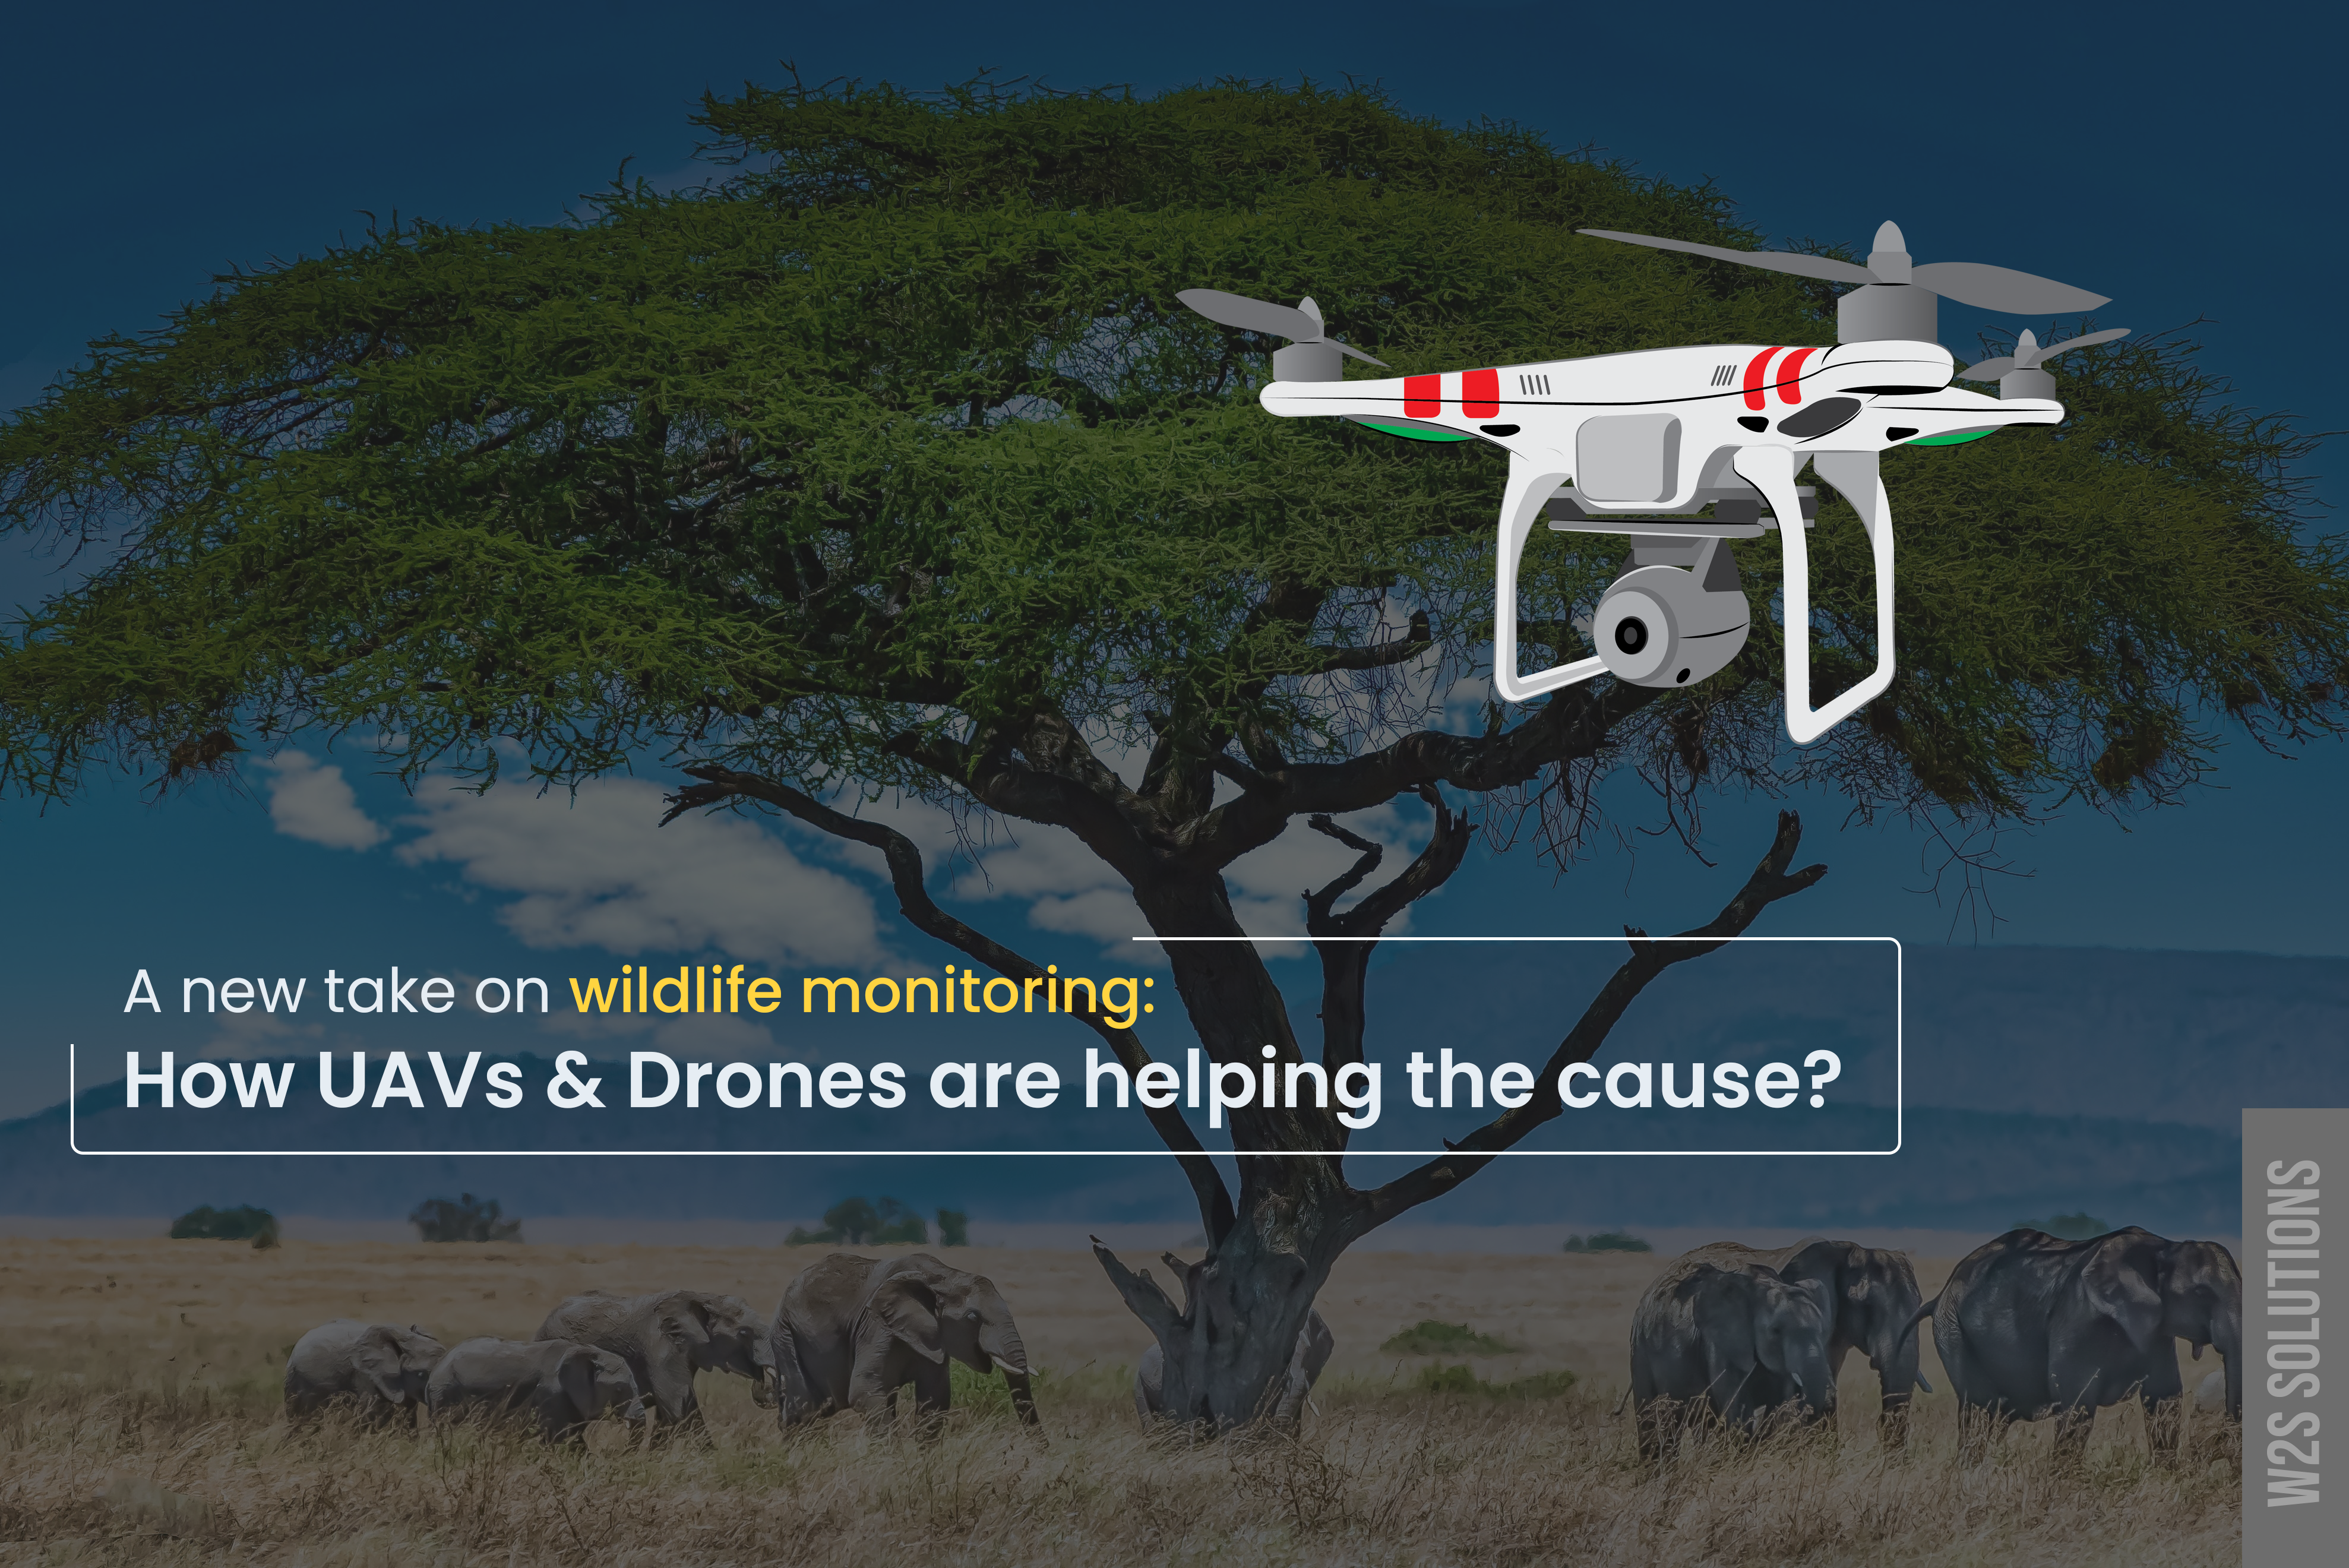 A new take on wildlife monitoring: How are UAVs and drones helping the cause?